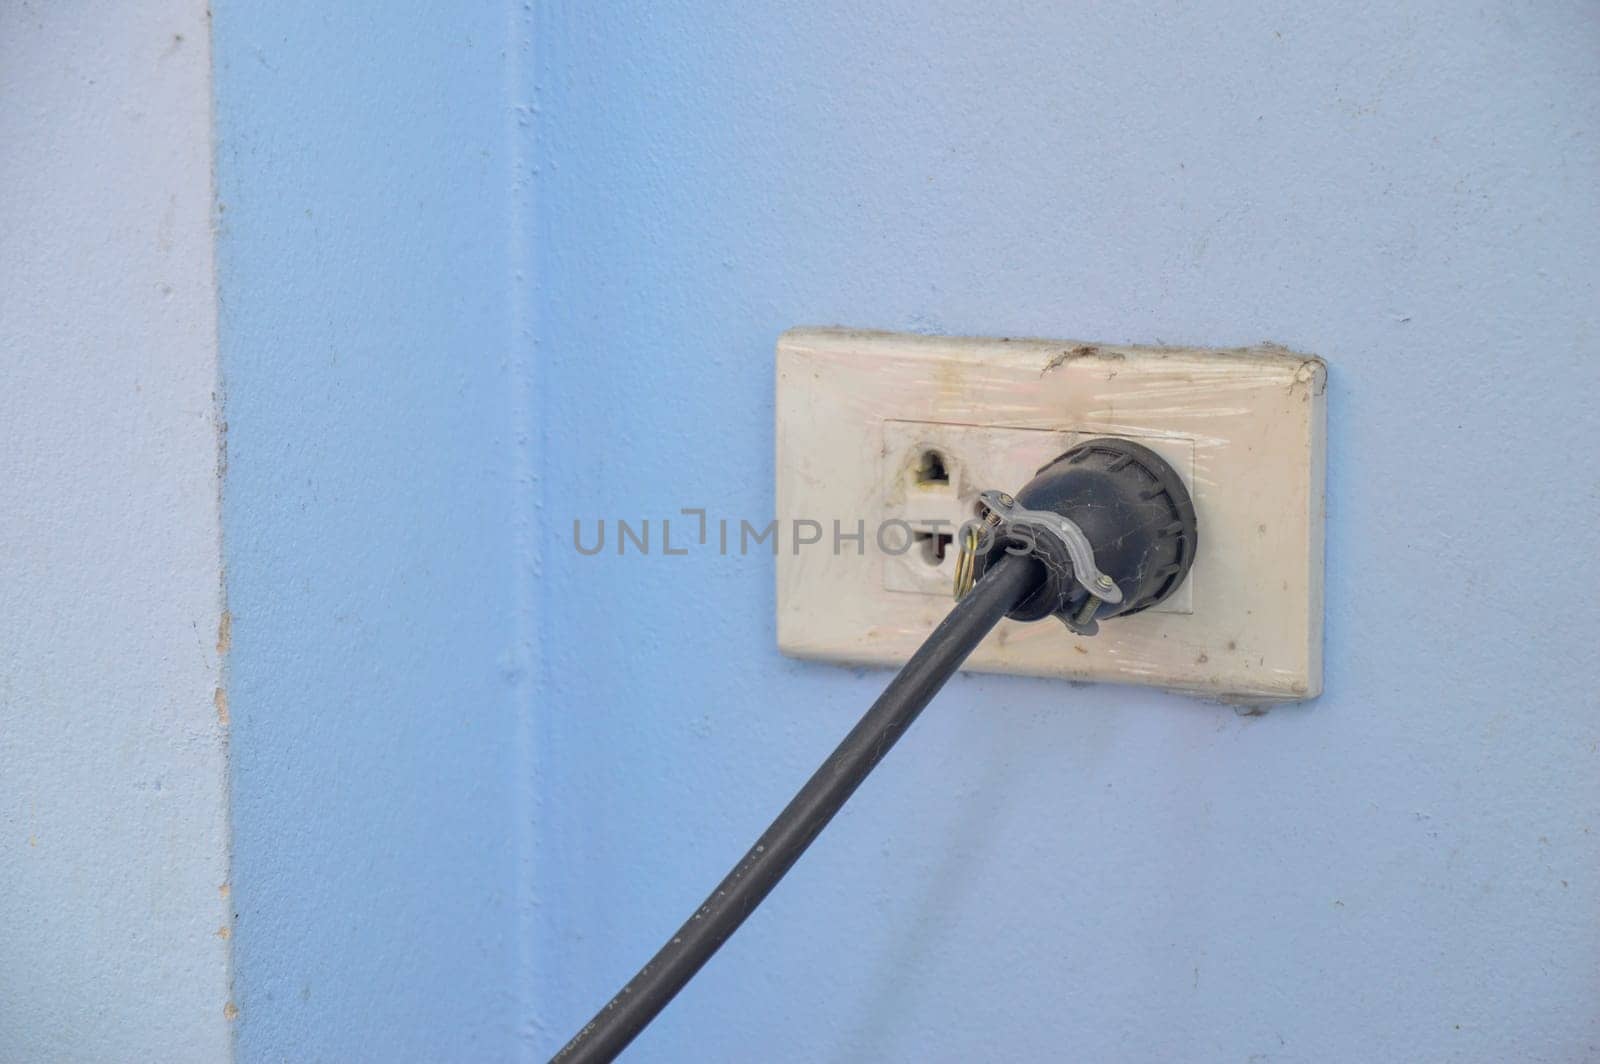 The power plug is plugged into the wall outlet. by boonruen